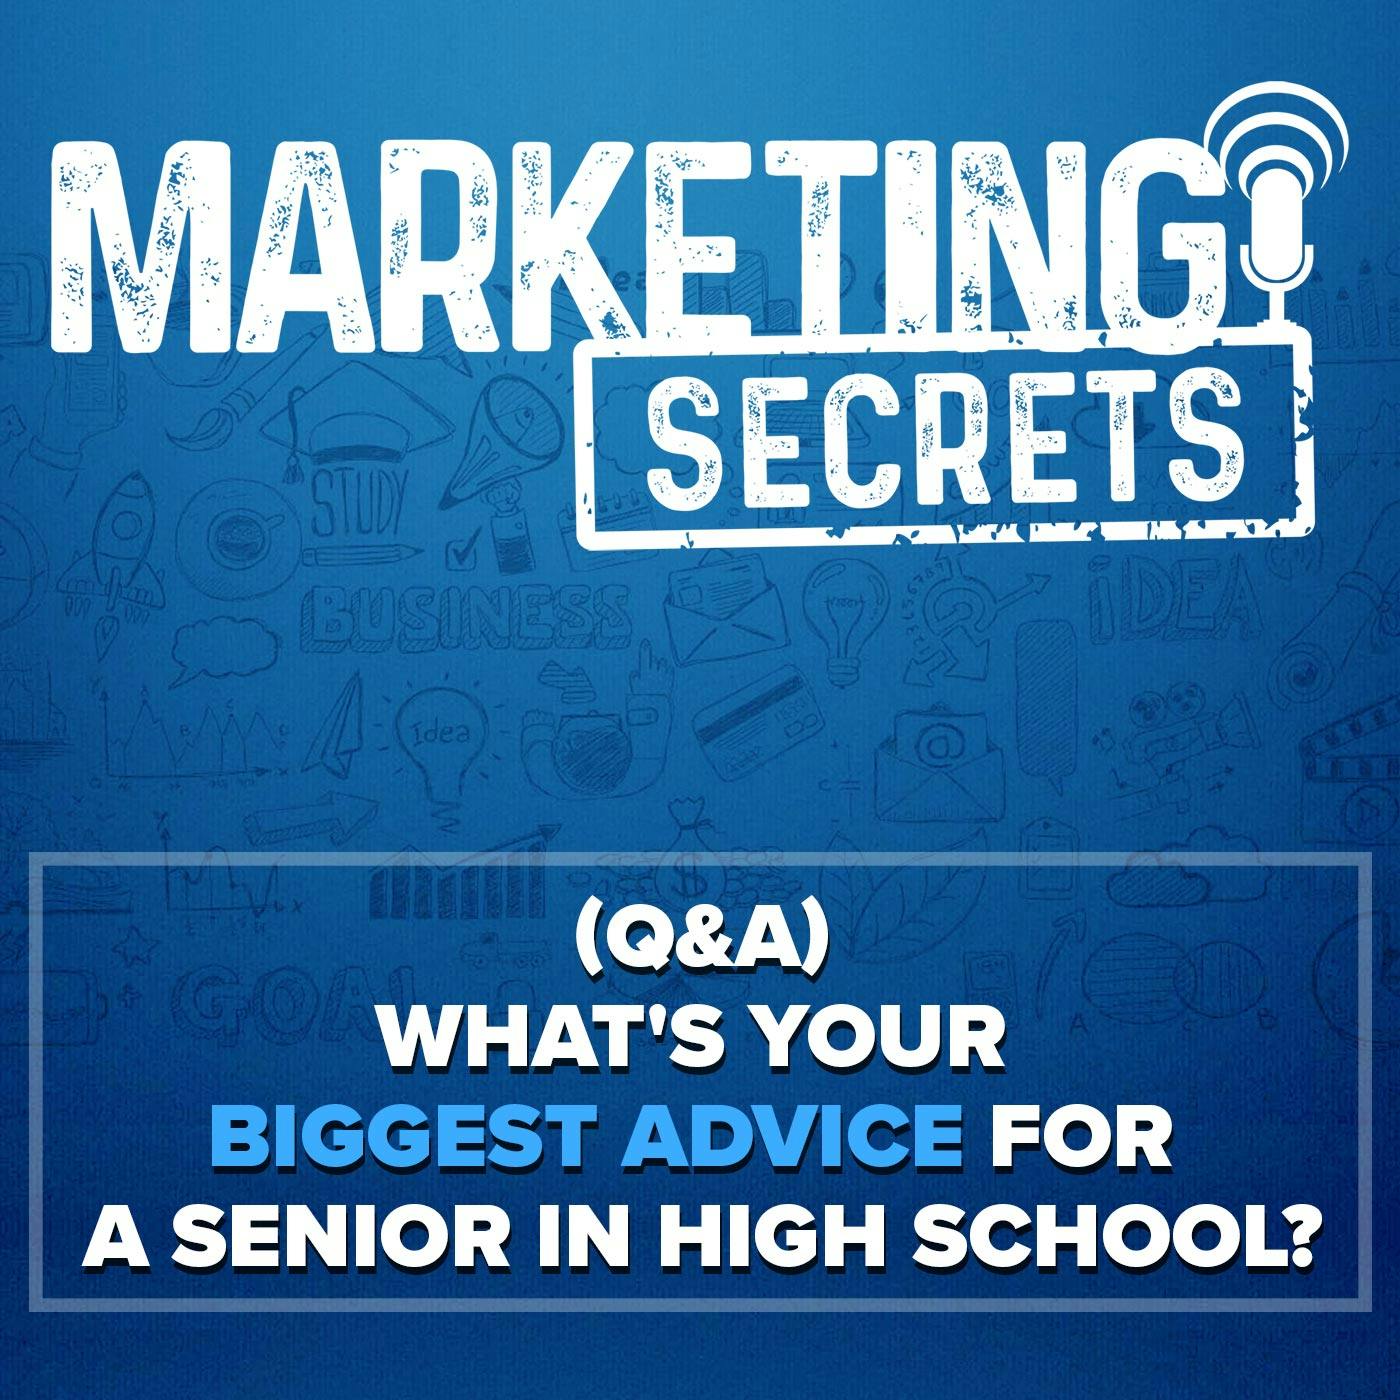 (Q&A) What's Your Biggest Advice For A Senior In High School?